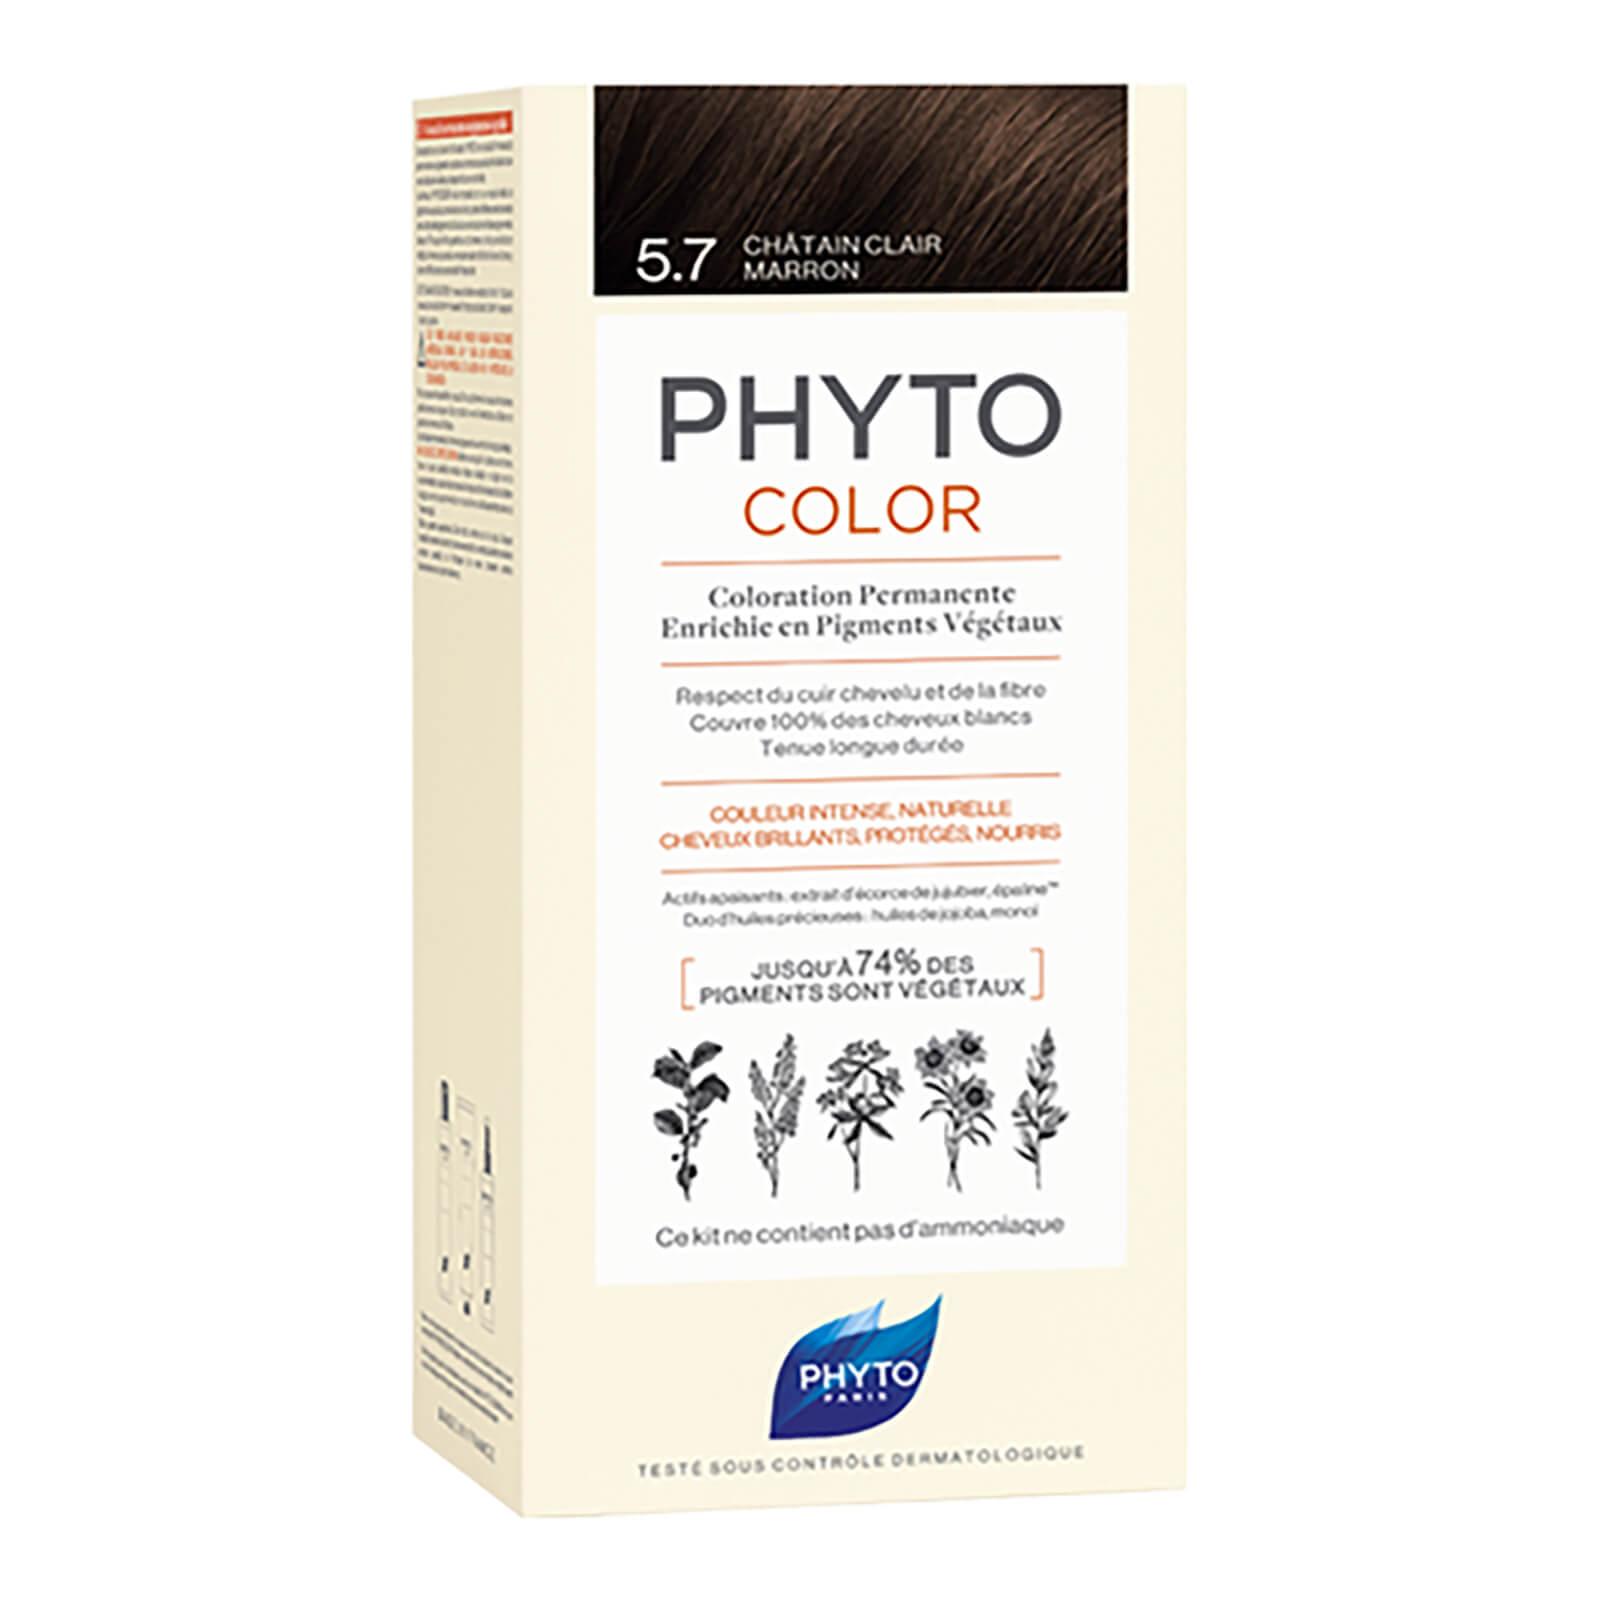 Phyto Hair Colour by Phytocolor - 5.7 Light Chestnut 180g